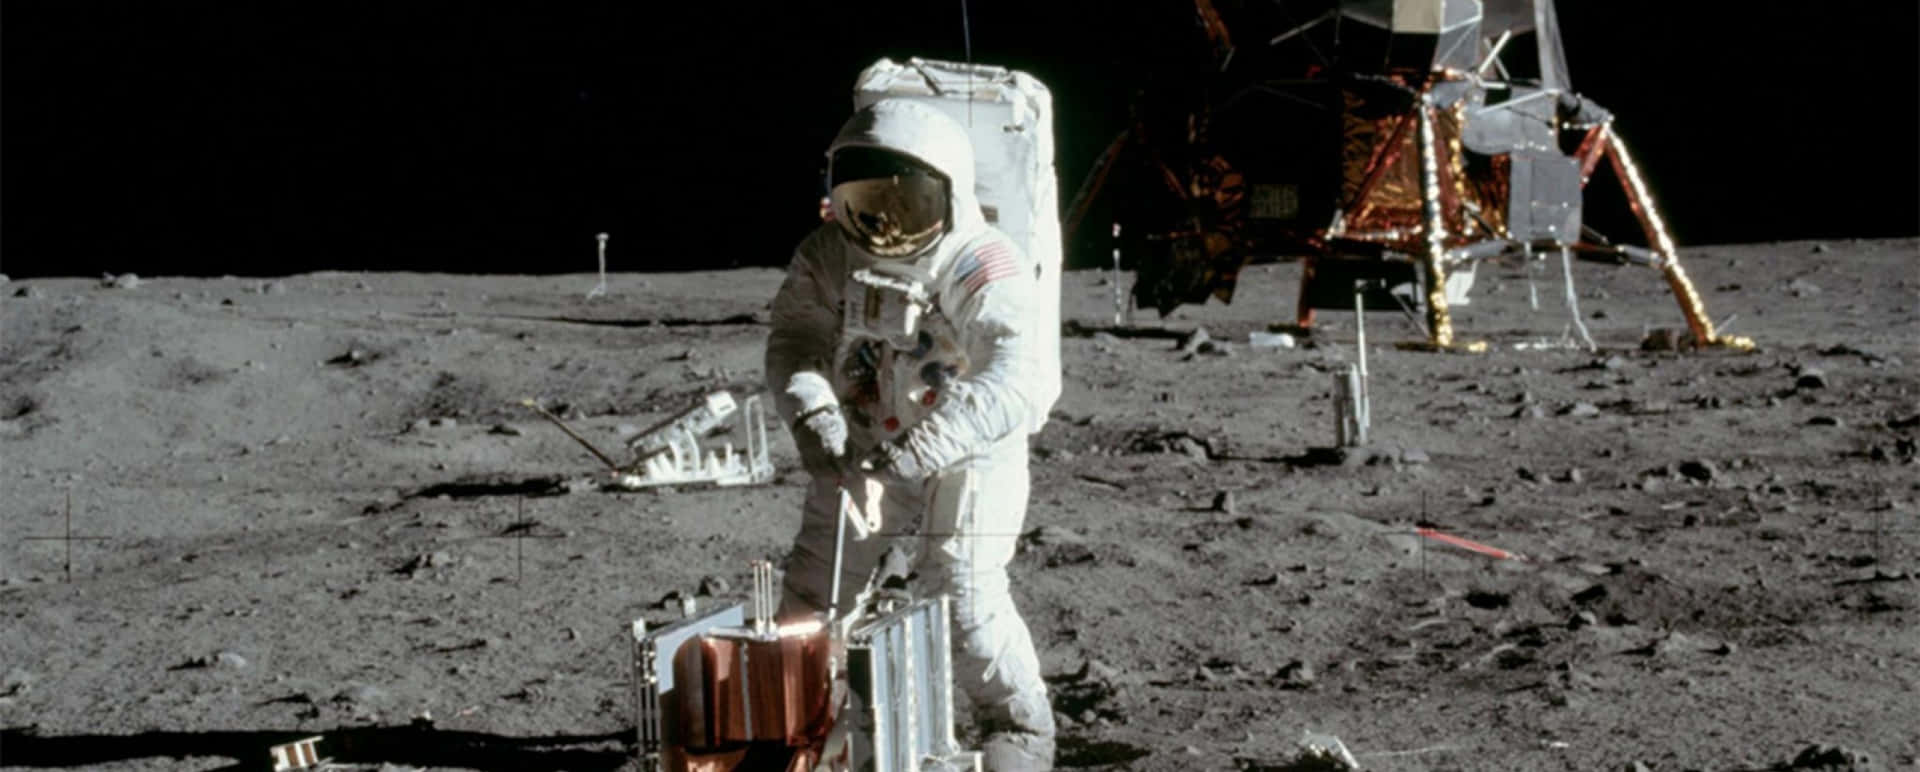 Astronaut Neil Armstrong on the Moon